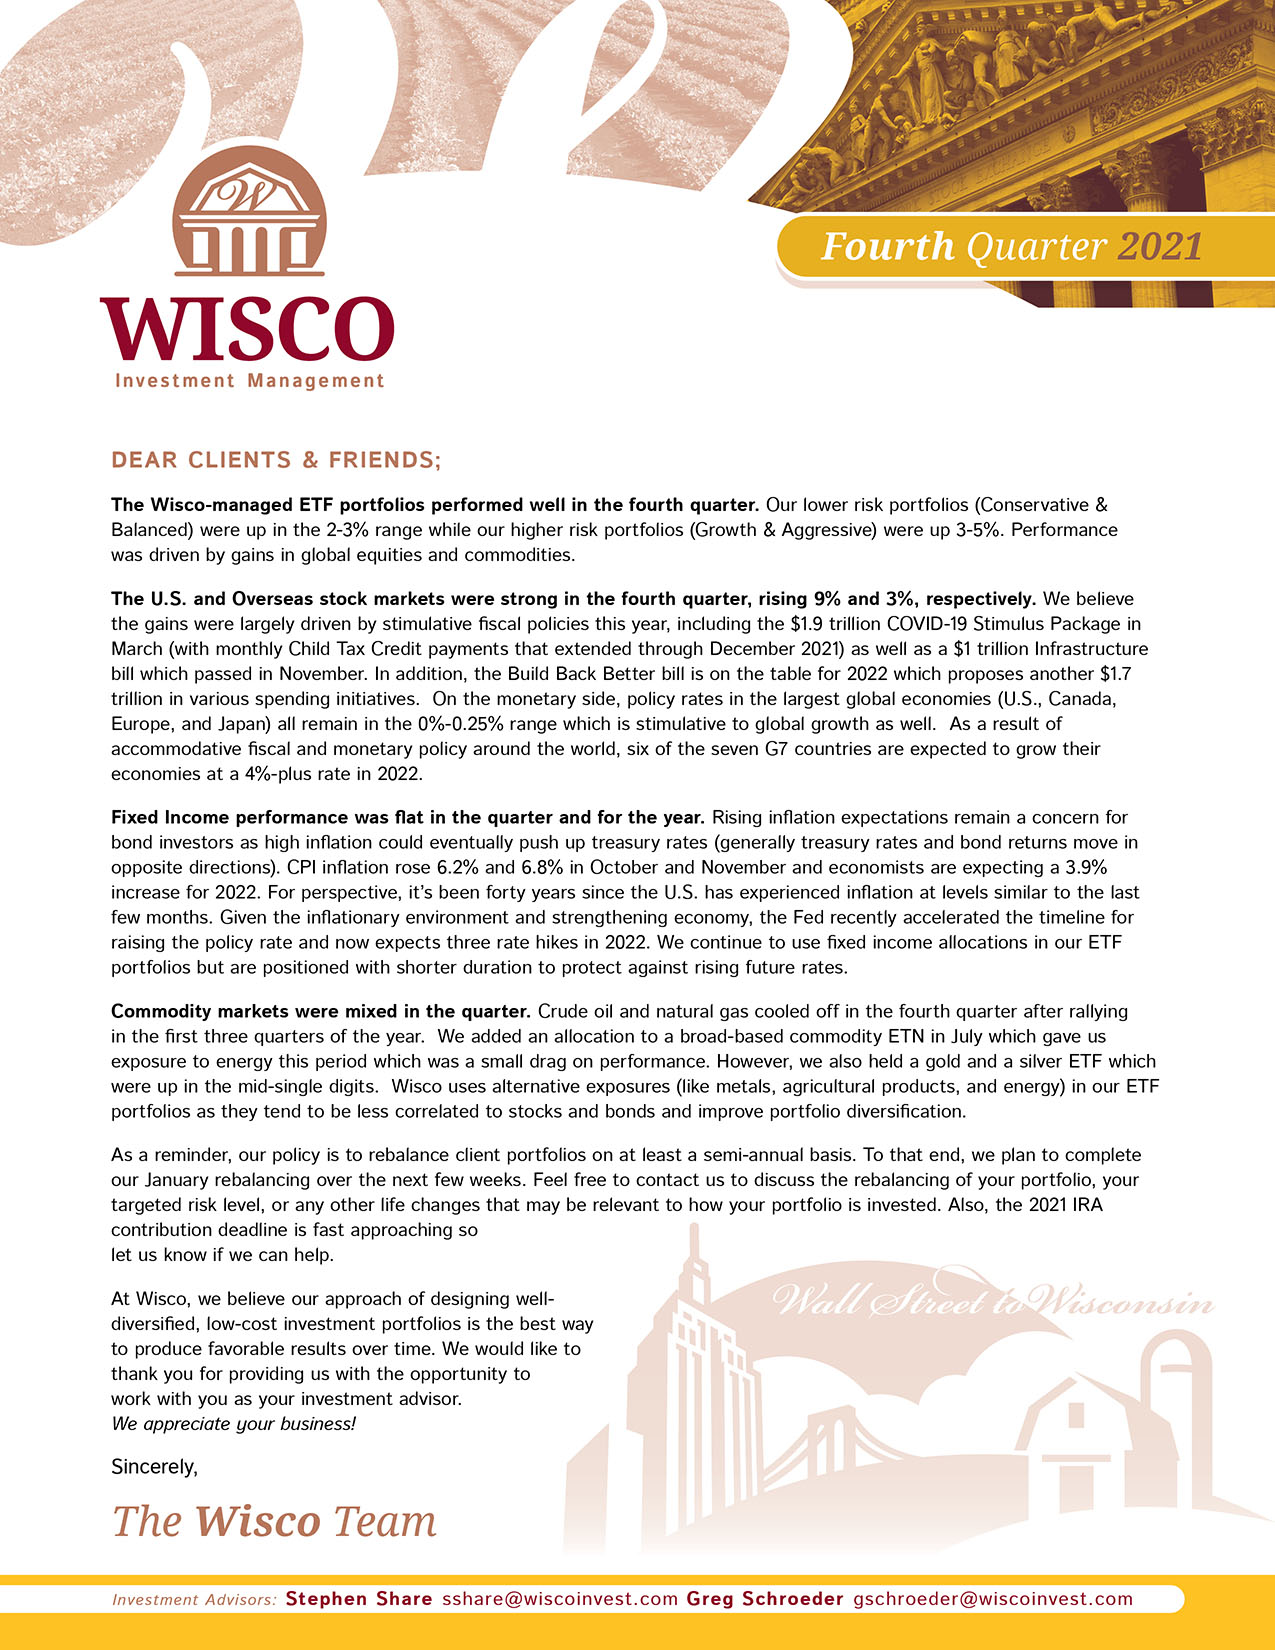 wisco-newsletter-4q21_cover1275px